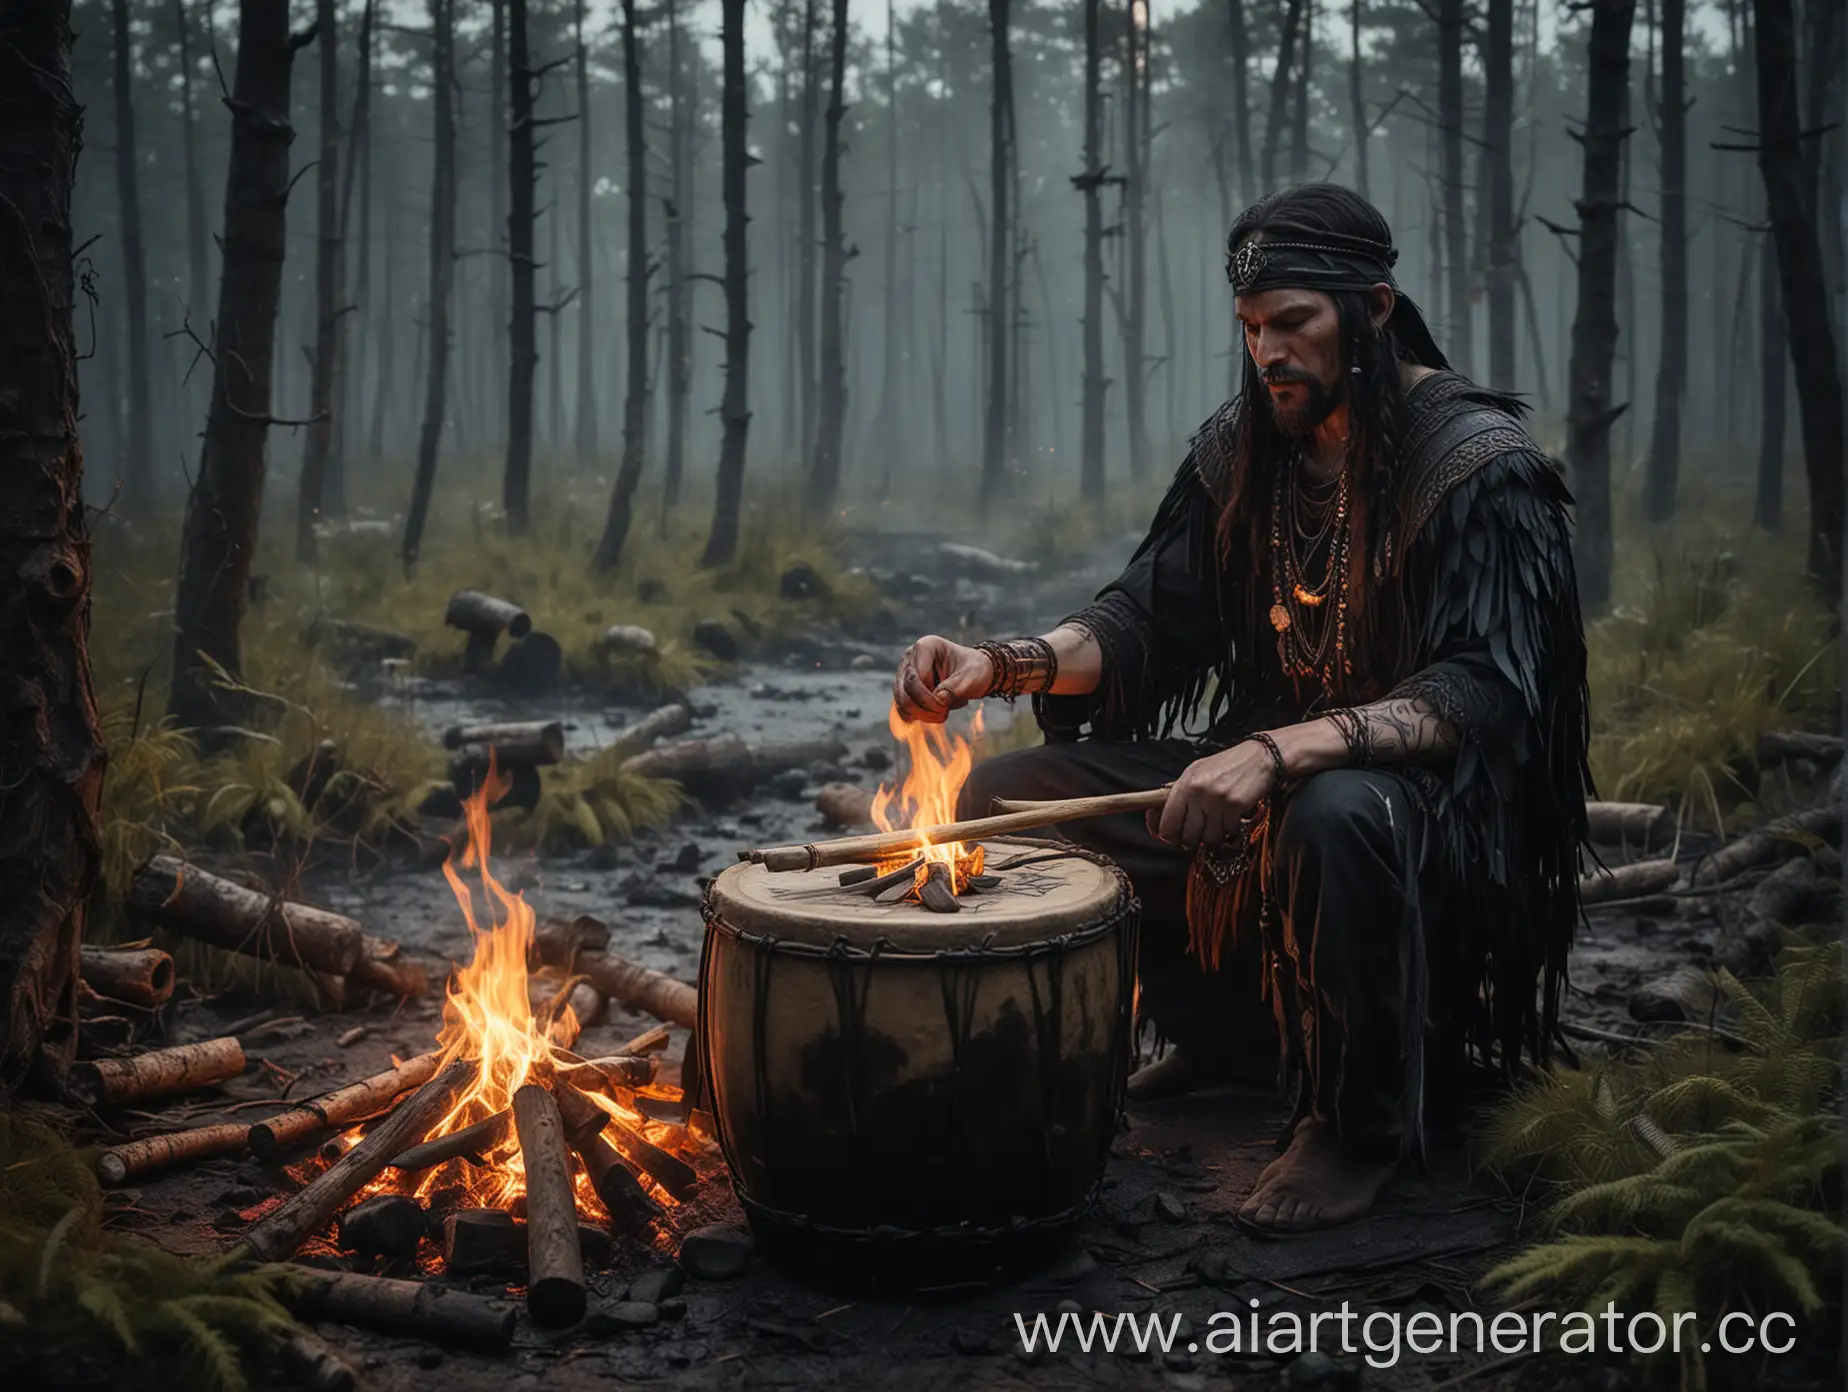 Shamanic-Ritual-Drumming-by-the-Bonfire-in-a-Dark-Forest-with-Raven-and-Runes